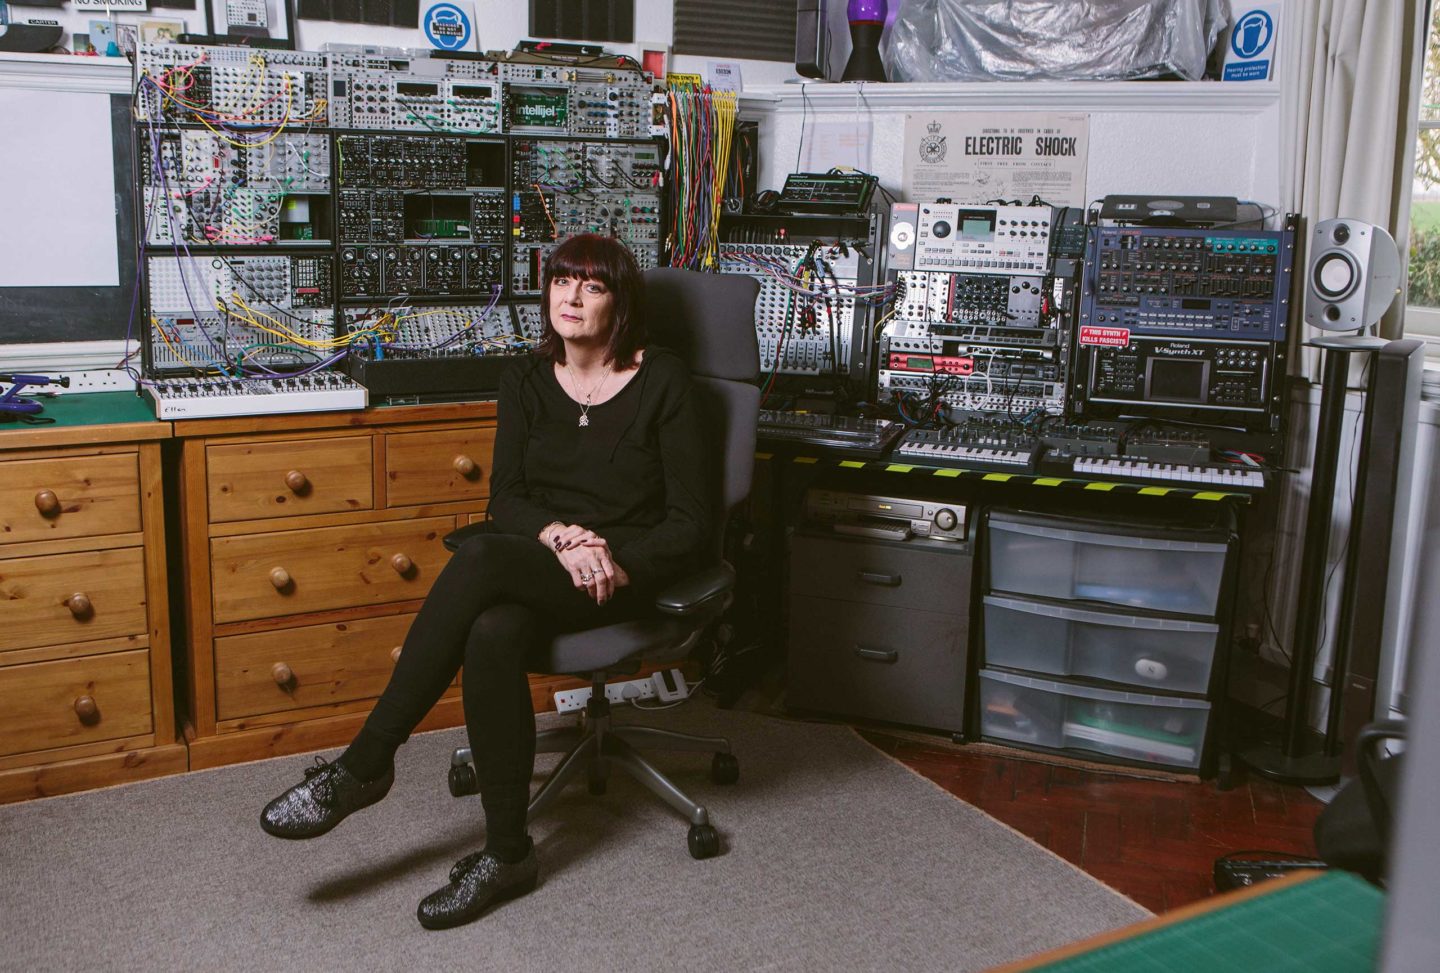 Cosey Fanni Tutti showed us around her home, an old school house in Norfolk